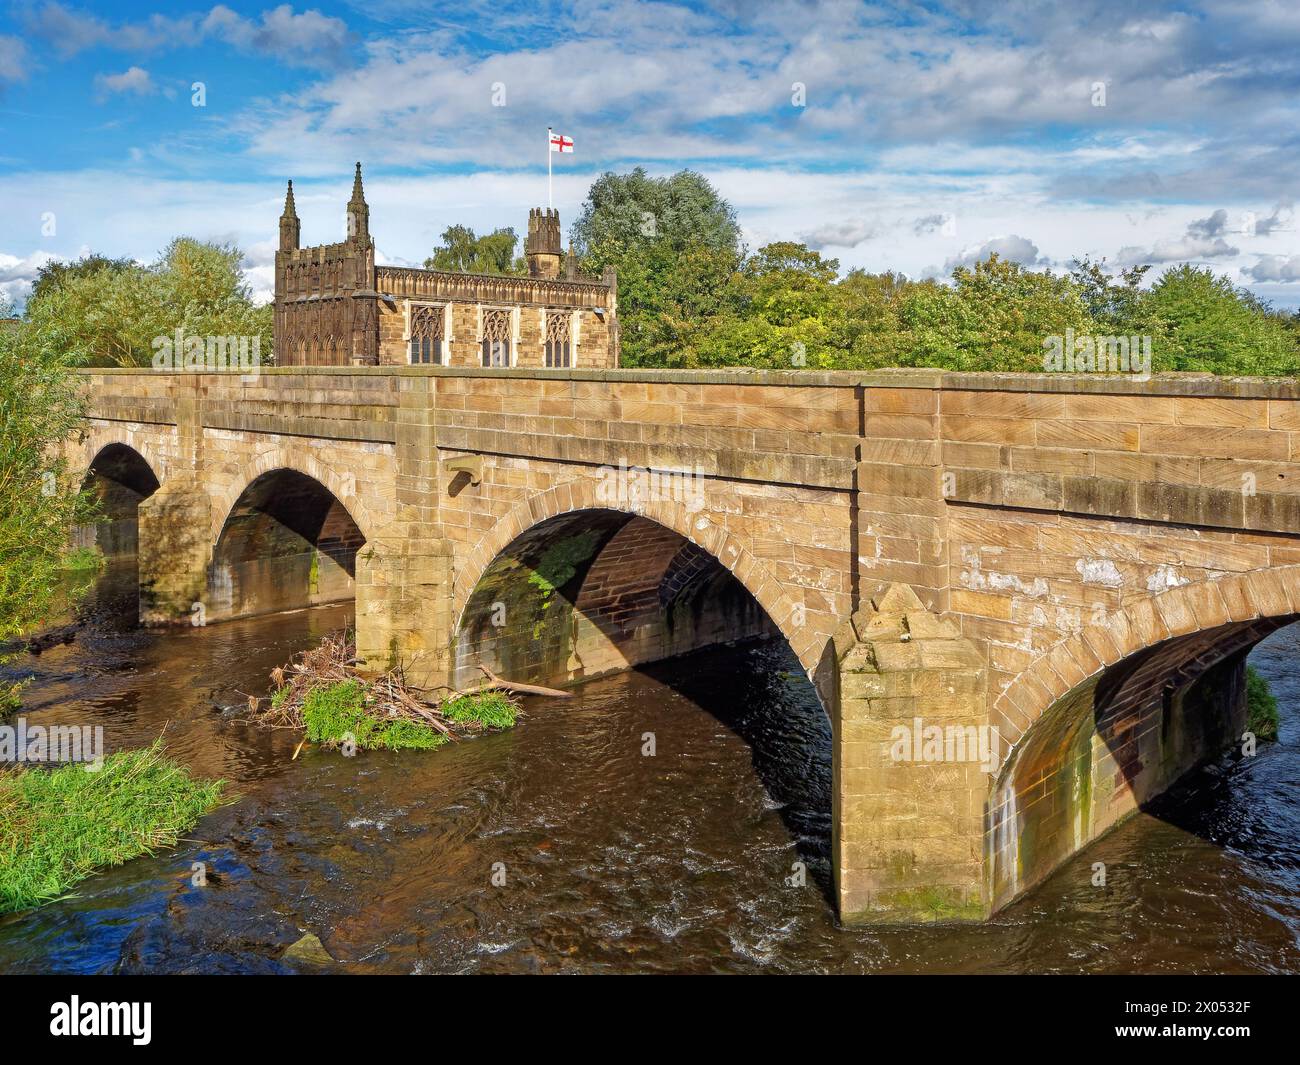 UK, West Yorkshire, Wakefield, Chantry Chapel of St Mary the Virgin & the Medieval Bridge over the River Calder. Stock Photo